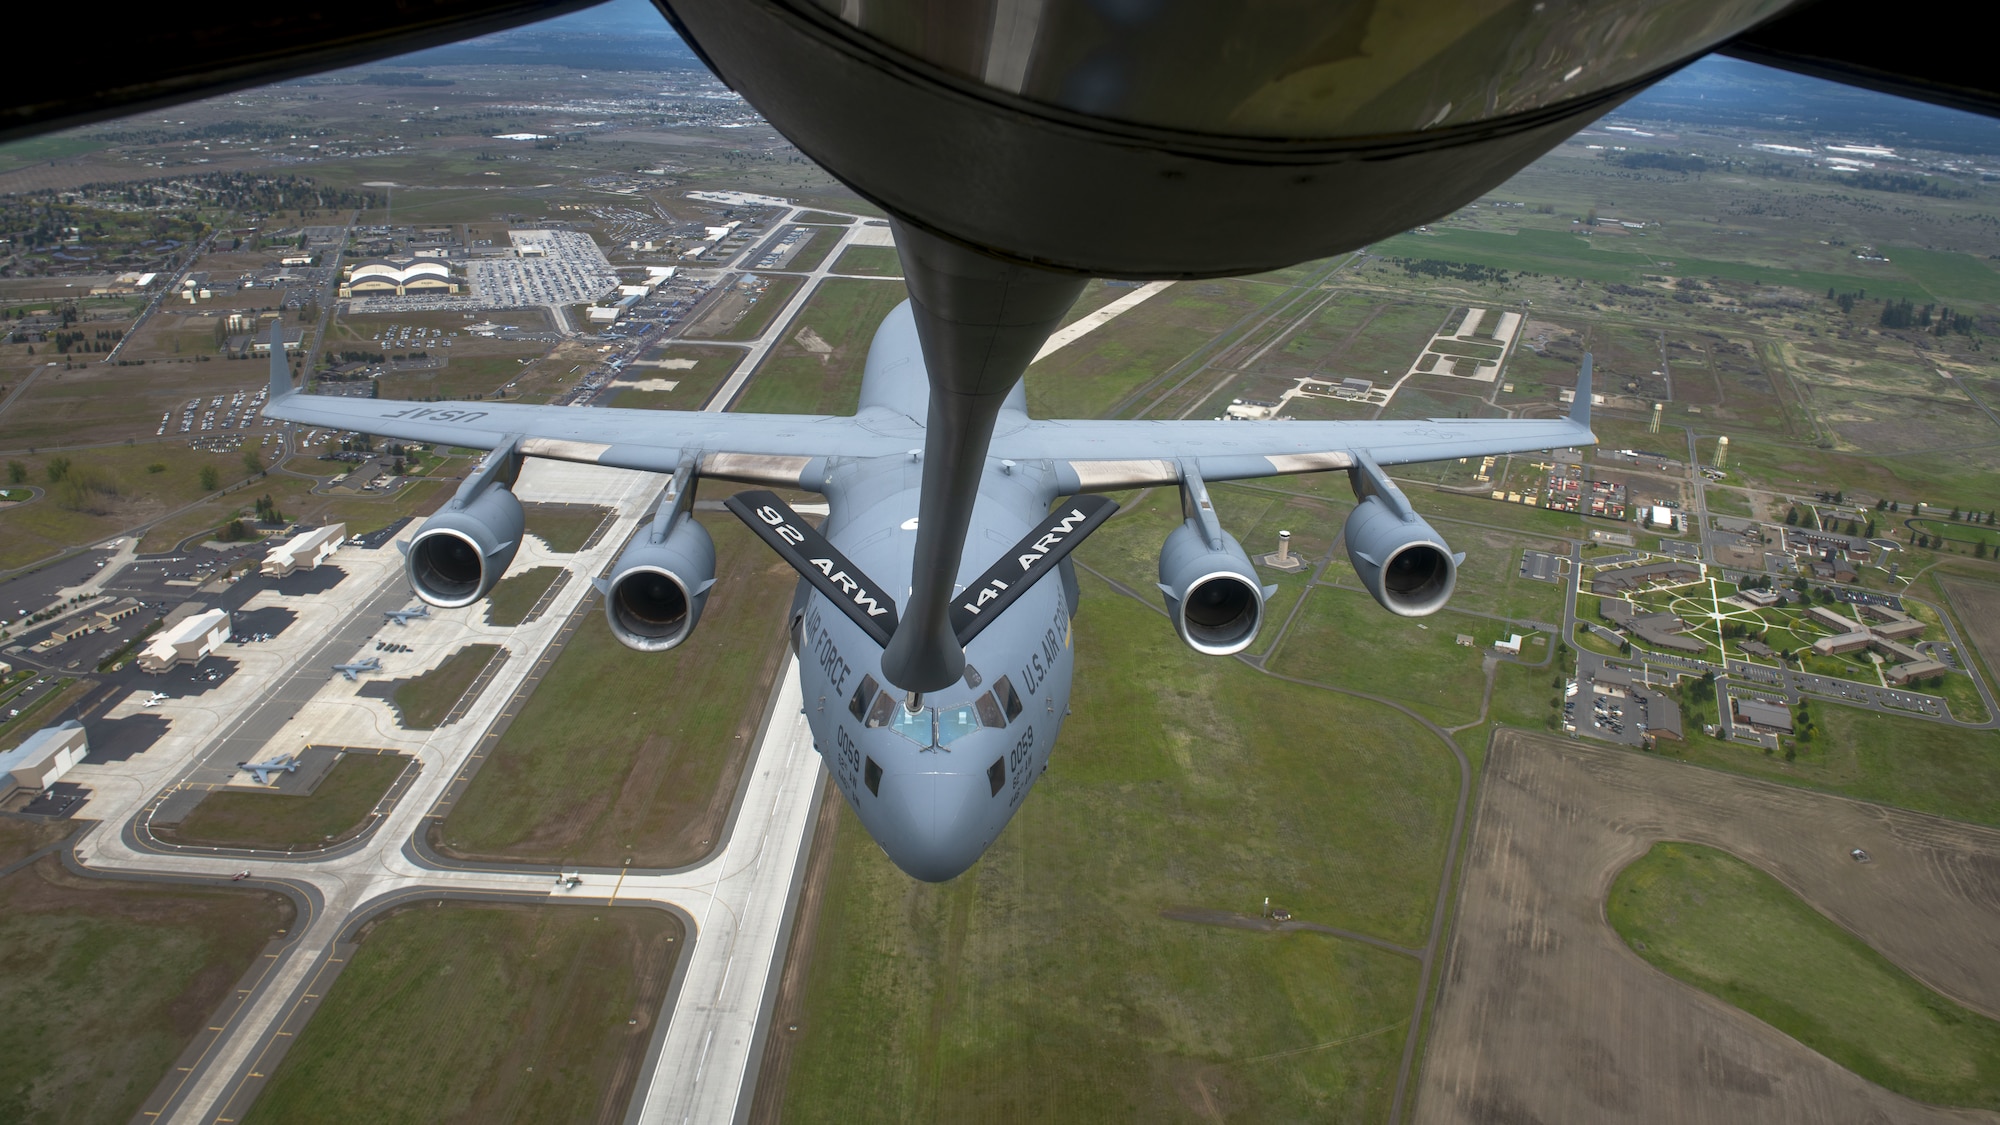 A C-17 Globemaster III and KC-135 Stratonker perform an air refueling demonstration during the Fairchild Skyfest 2022 airshow at Fairchild Air Force Base, Washington, May 15, 2022. Fairchild Skyfest 2022 gave the Inland Northwest a chance to meet members of Team Fairchild and see the U.S. Air Force's premier air refueling wing in action during a simulated KC-135 Stratotanker low-pass refuel of a C-17 Globemaster III. (U.S. Air Force photo by Staff Sgt. Lawrence Sena)